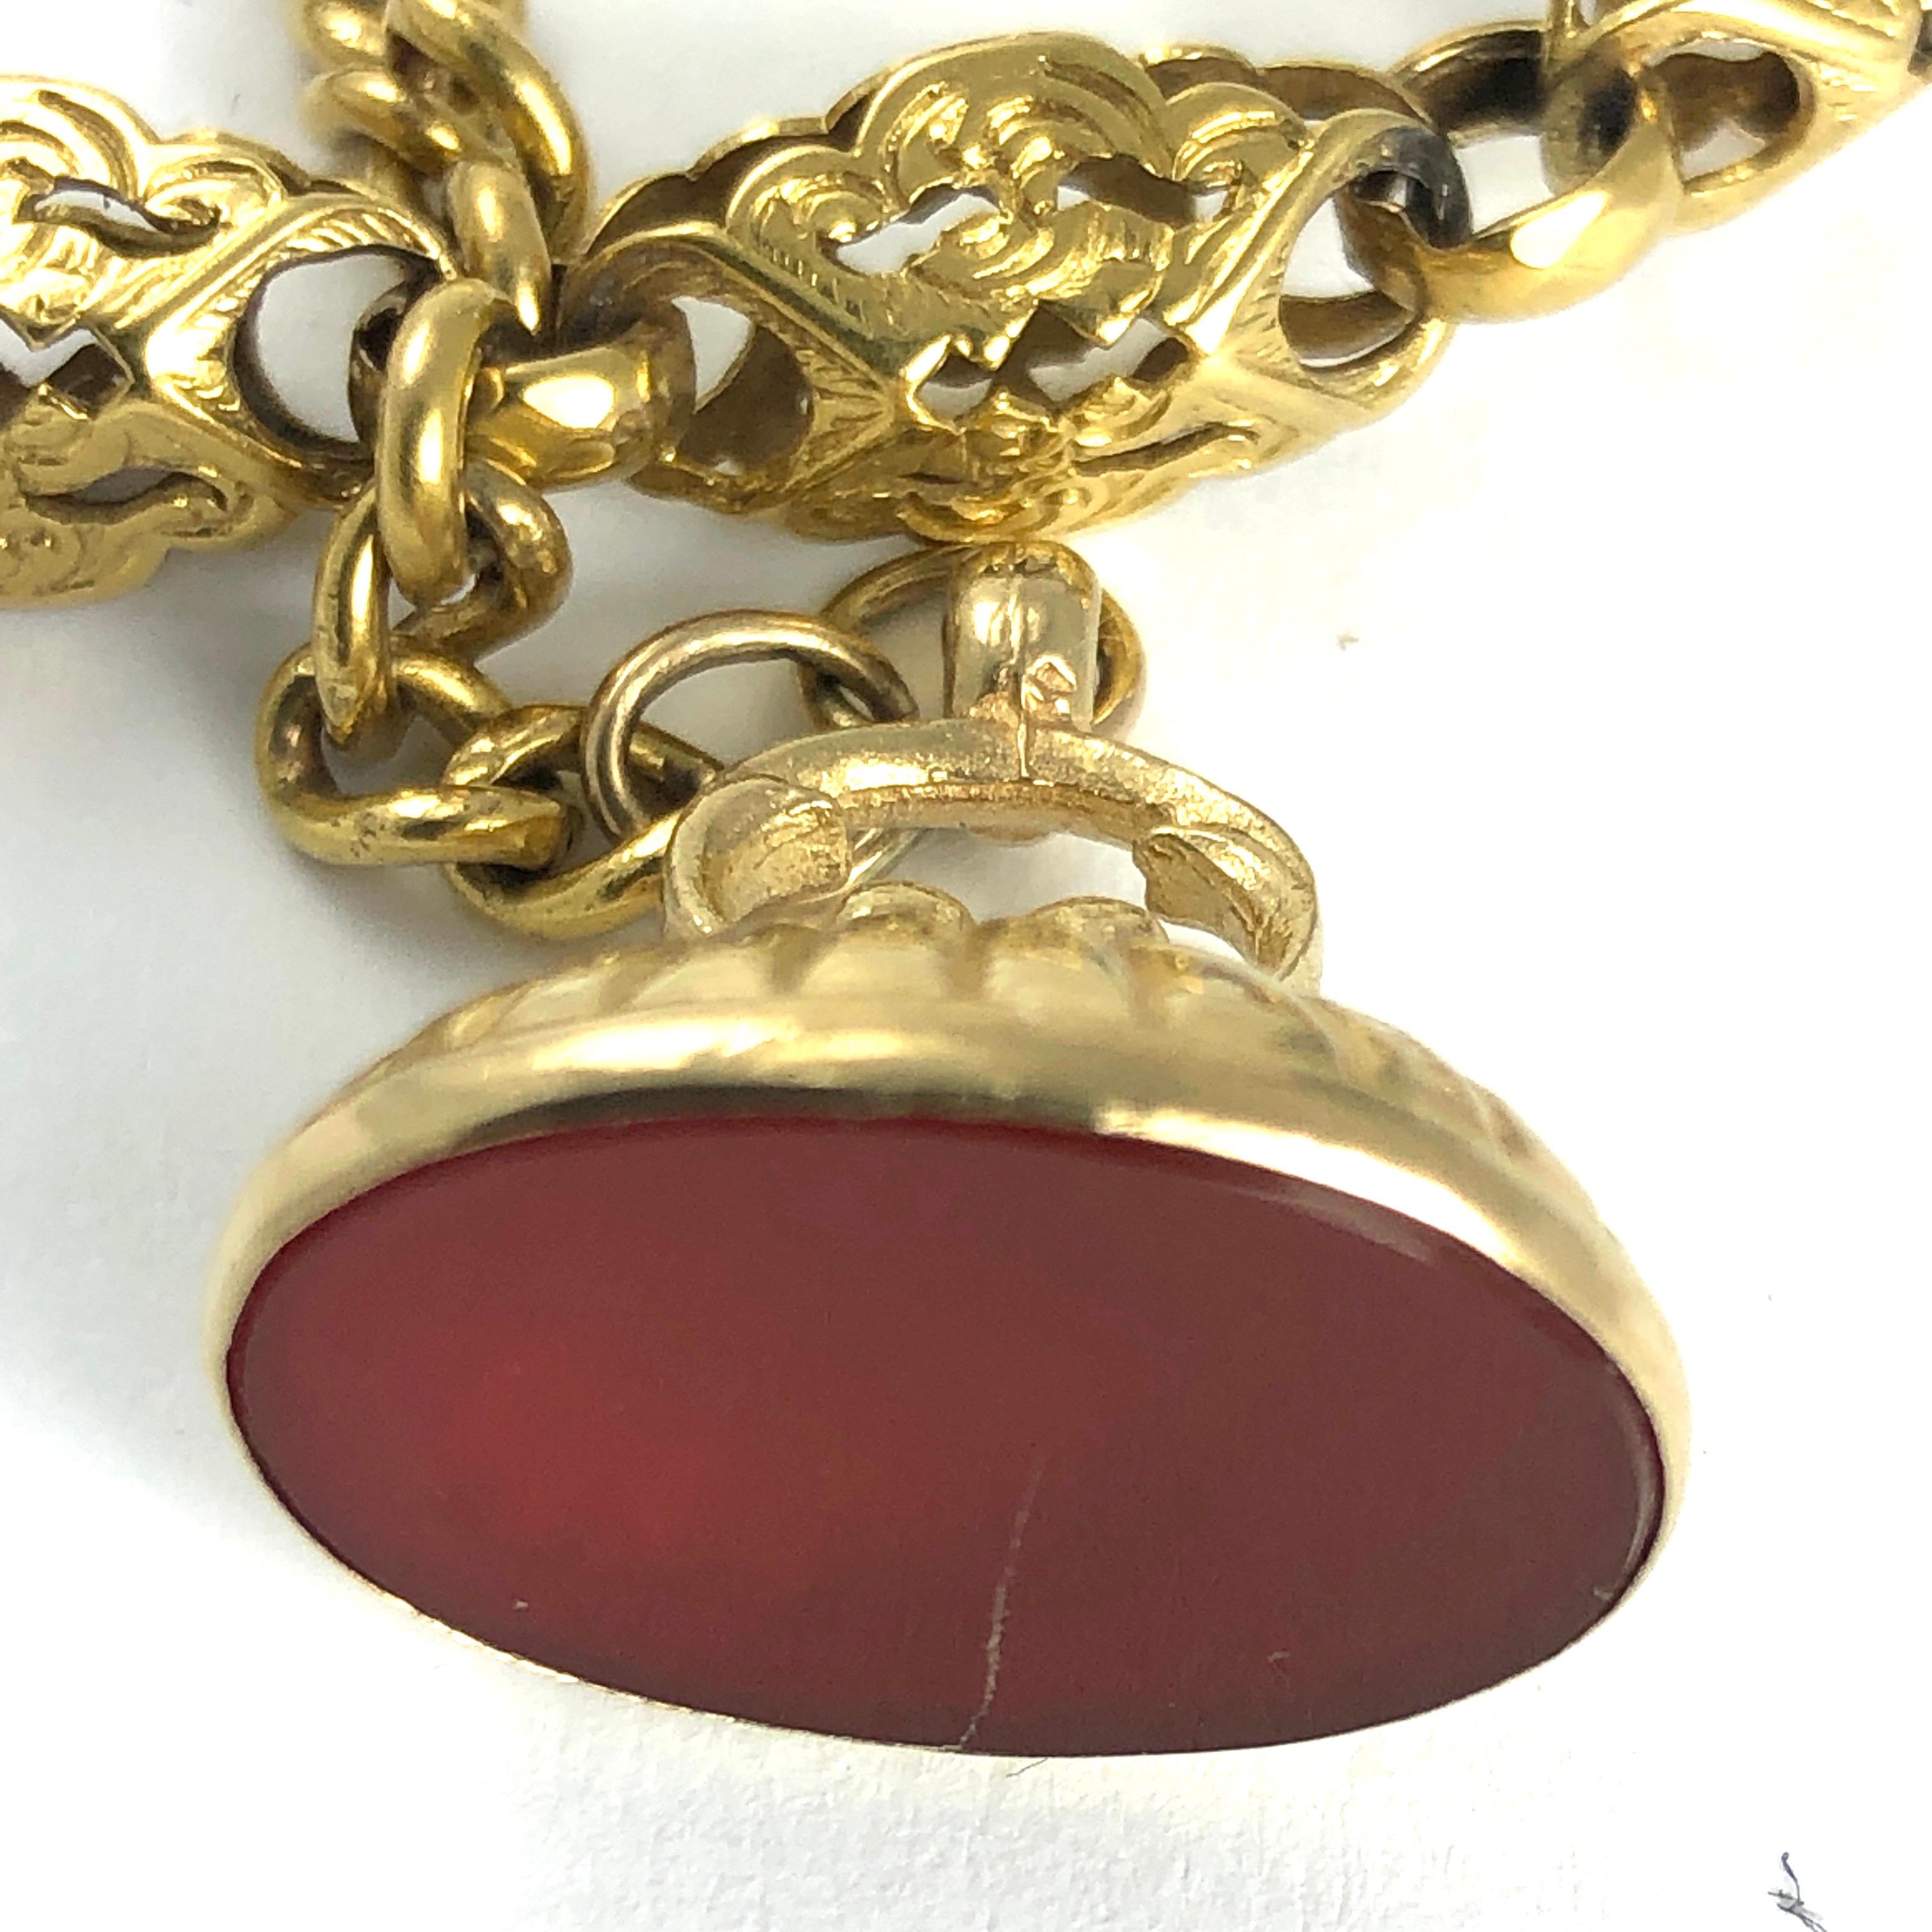 The links of this Albert chain are so exquisitely detailed and are modelled in 9ct gold. At the centre of the chain is a t-bar and carnelian fold with one end holding a loop and the other a dog clip.

Length: 11inches

Weight: 18.4g

*slight crack